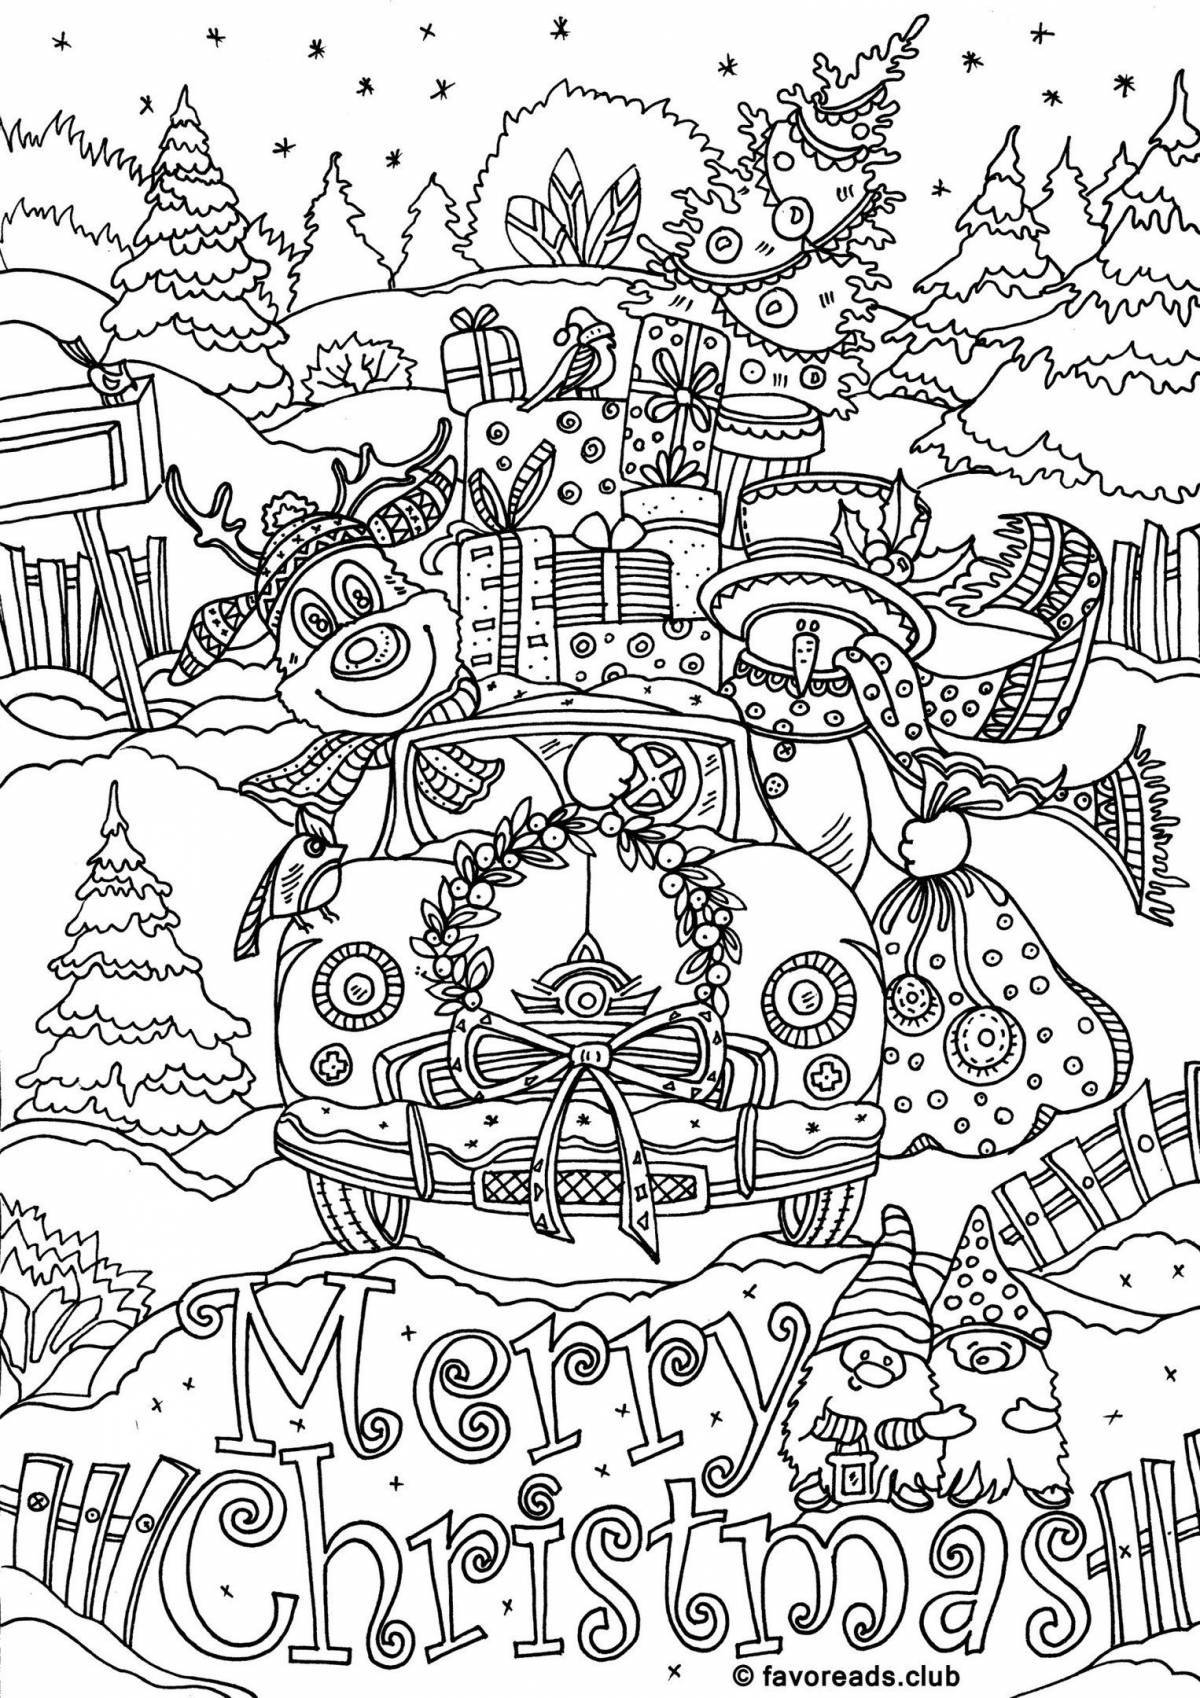 Exciting anti-stress Christmas coloring book